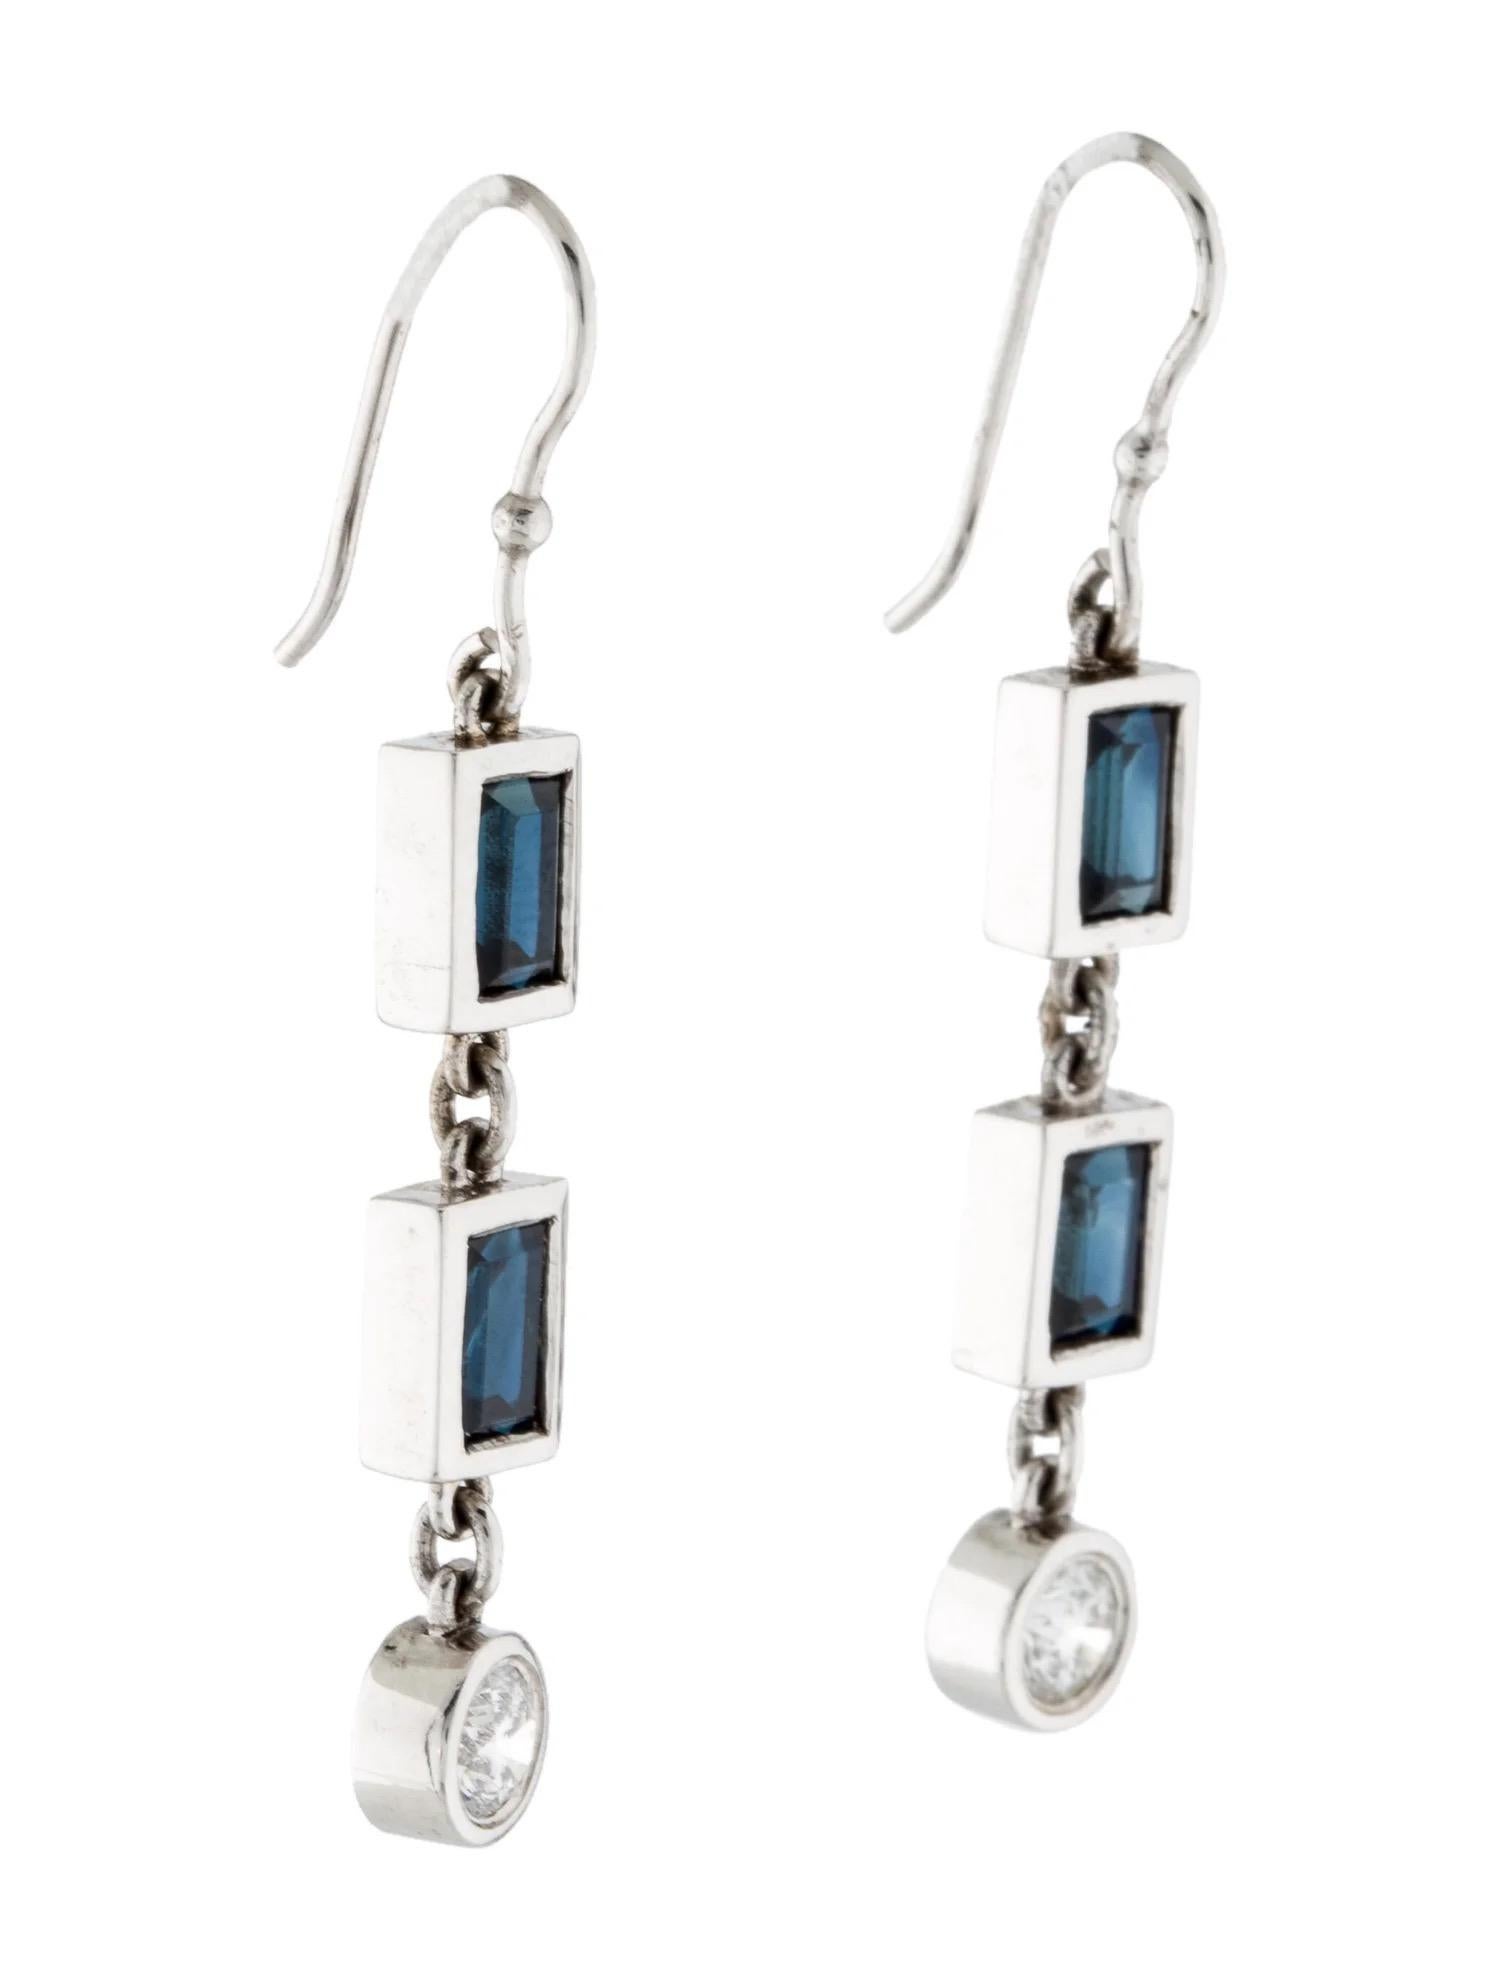 These dangle earrings are set in 14K White Gold with Four (4) Rectangular Step Cut Blue Sapphires weighing 3.31ctw and Two (2) Round Brilliant Cut Diamonds Weighing 0.67ctw. 